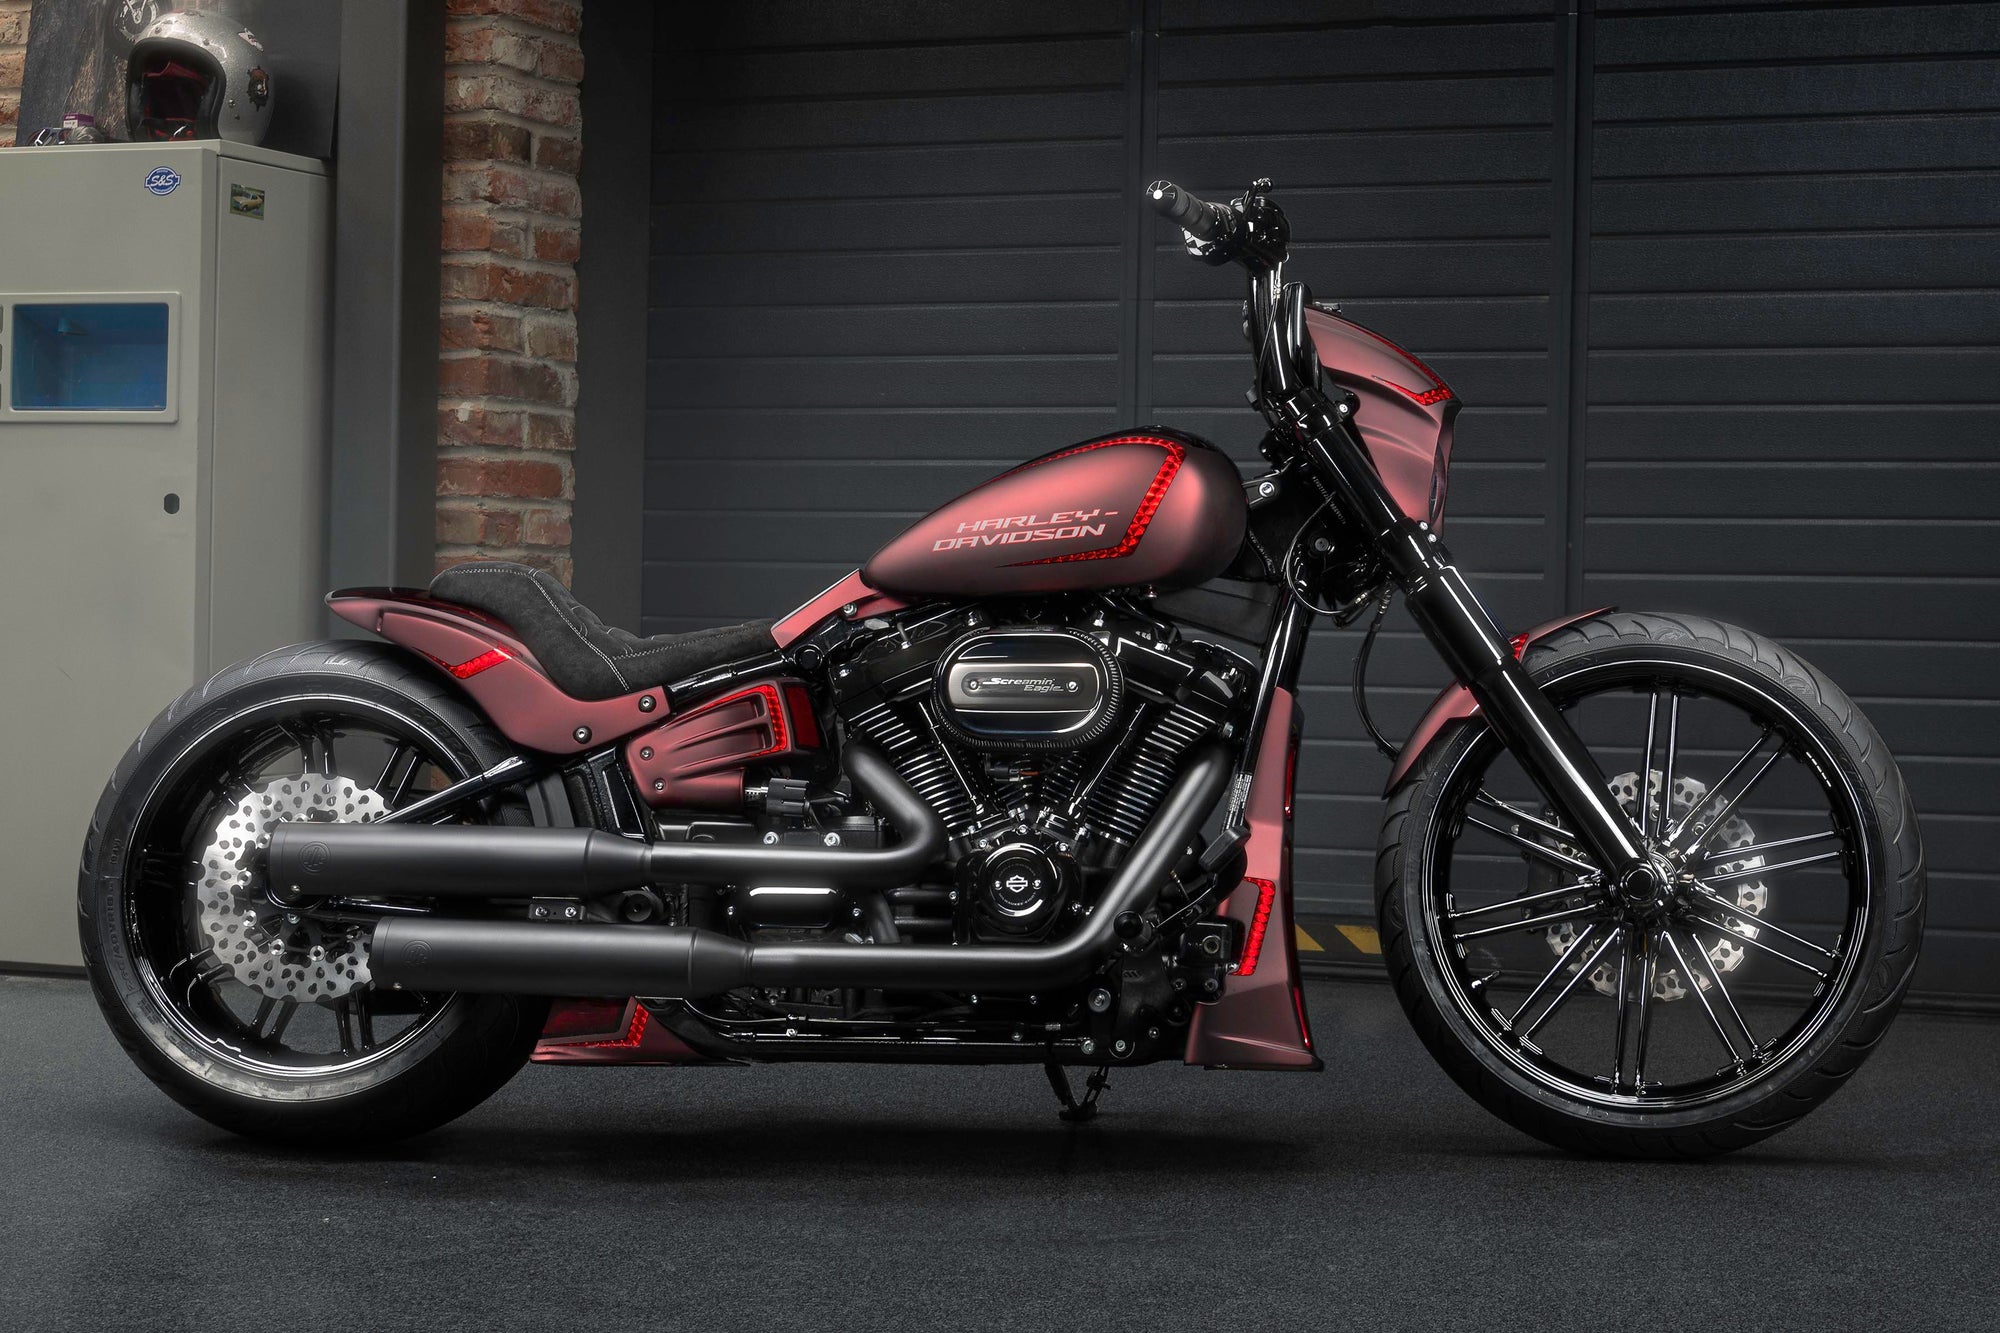 Harley Davidson motorcycle with Killer Custom parts from the side in a modern garage